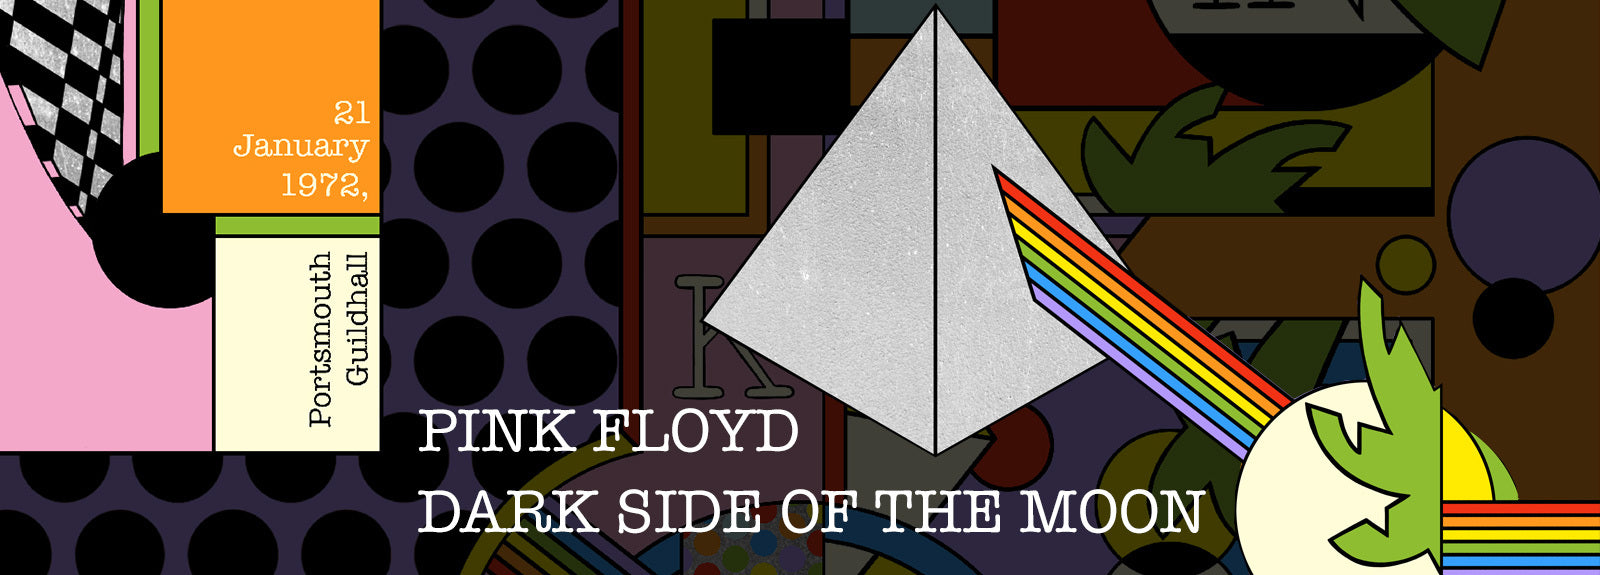 FOR IMMEDIATE RELEASE: Celebrate Pink Floyd's “Dark Side of the Moon” March  25th 3 pm to 6 pm local time in North America High End Audio Stores - On a  Higher Note